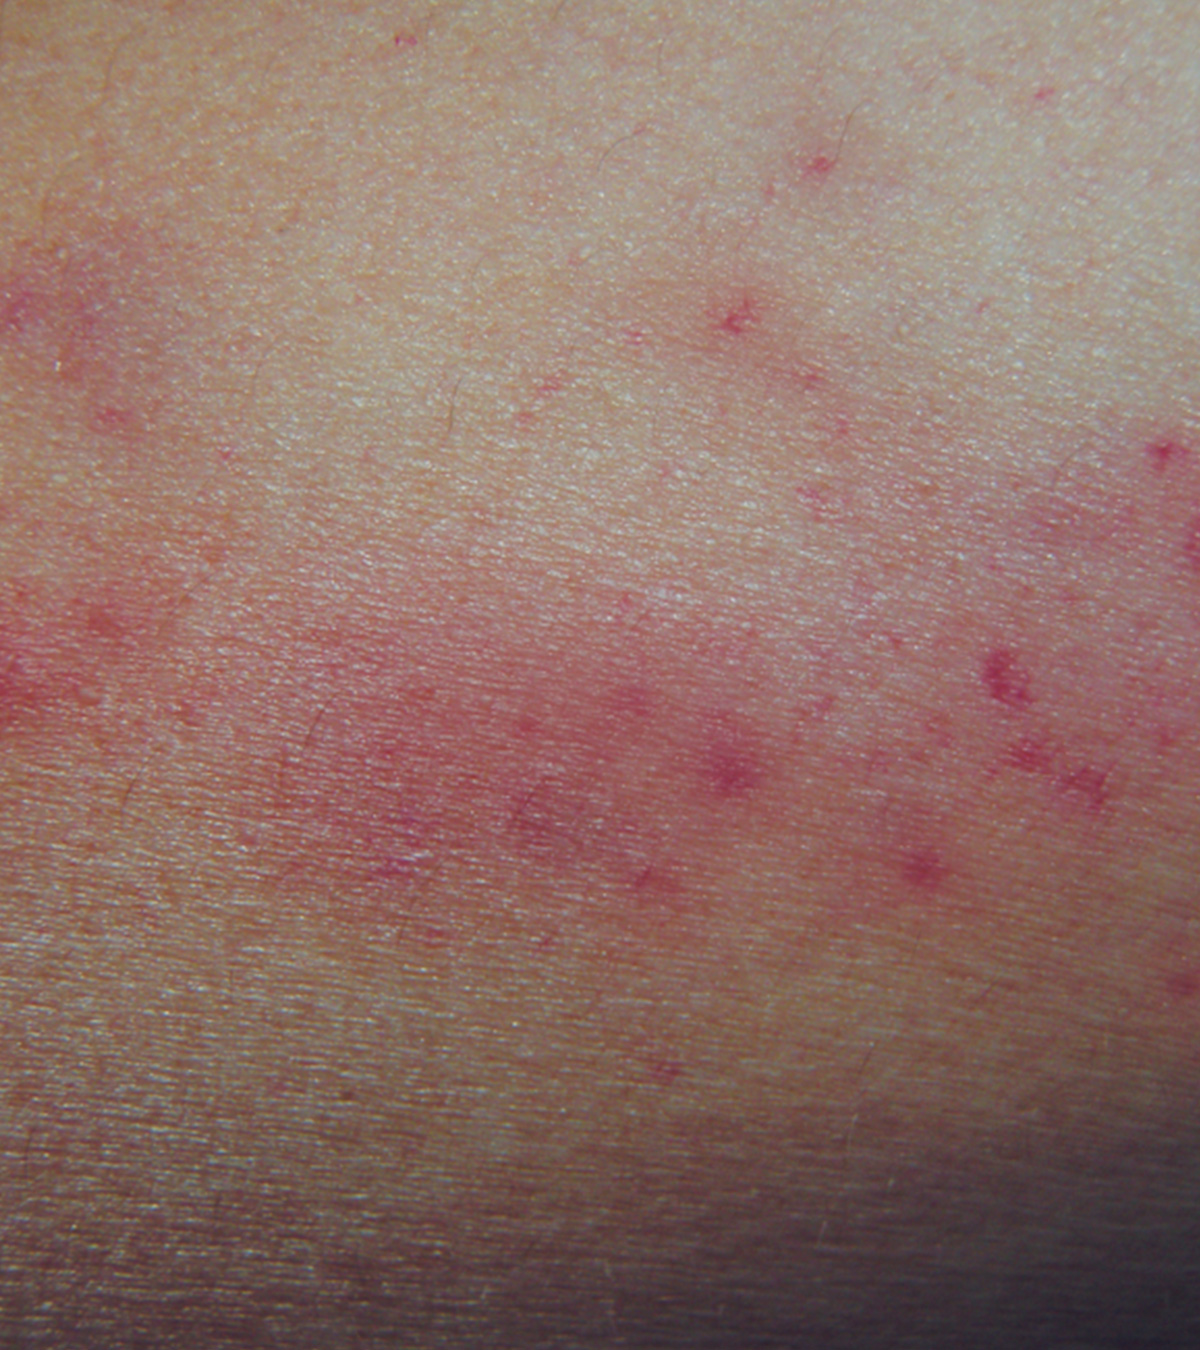 Petechiae In Children: Causes, Symptoms And Treatment